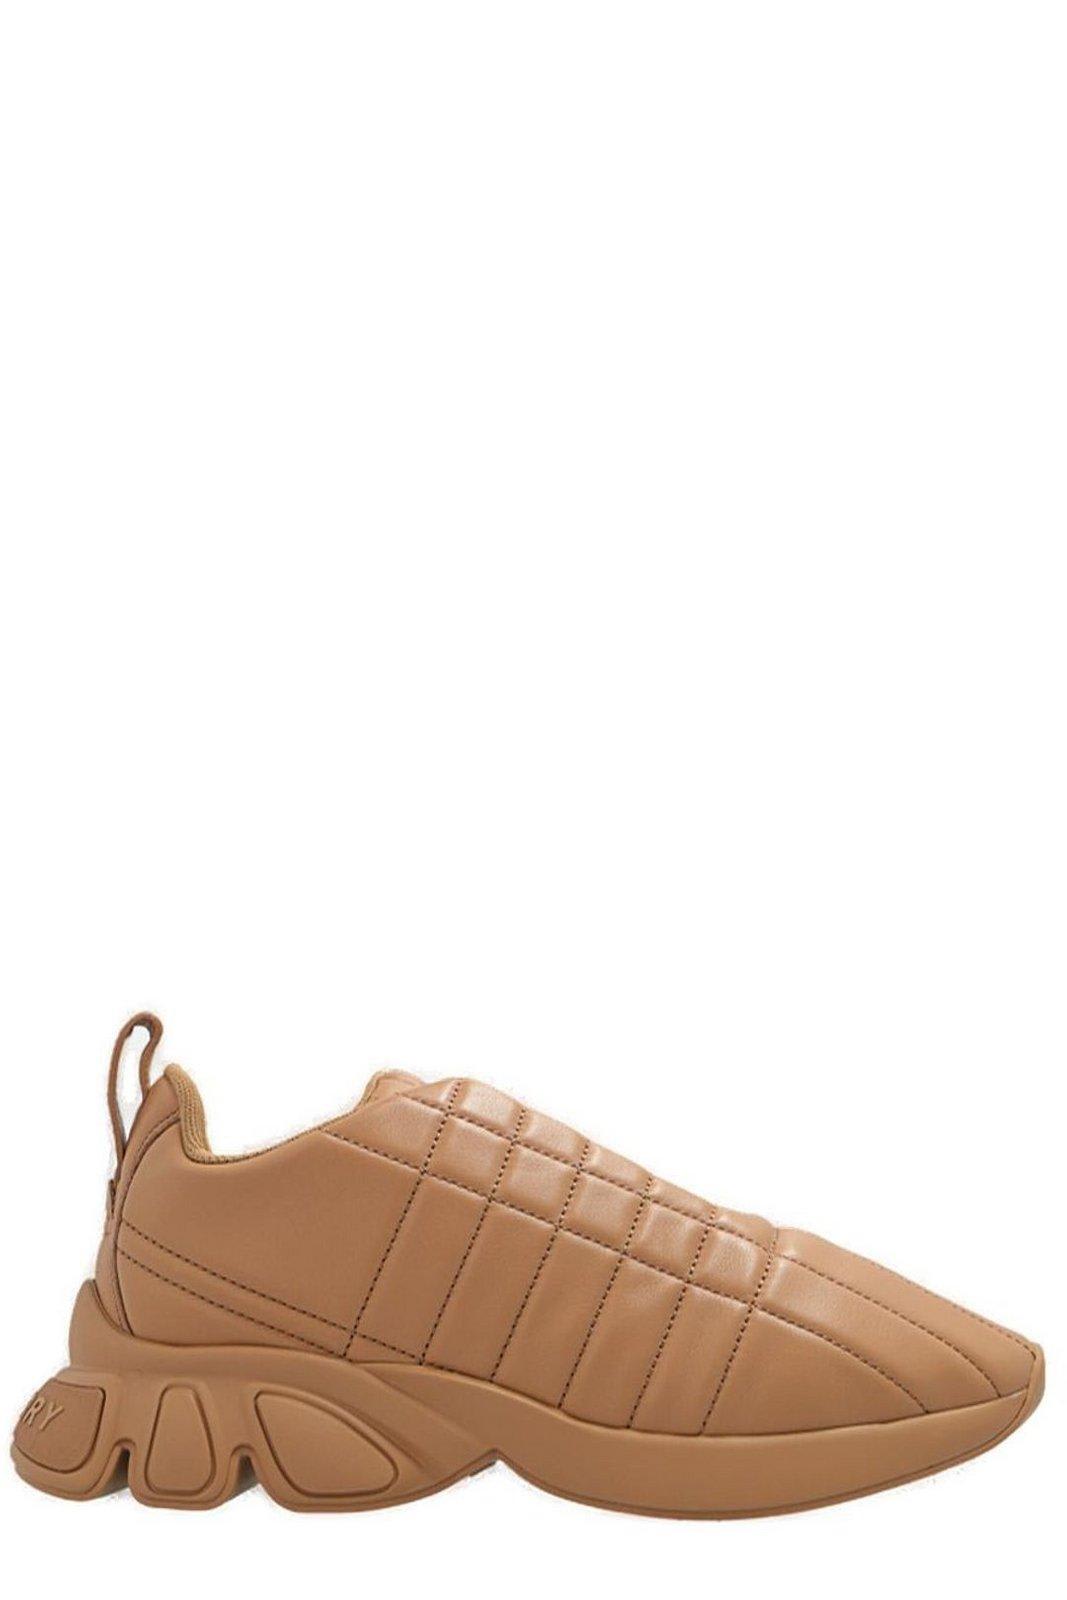 Burberry Quilted Low-top Sneakers